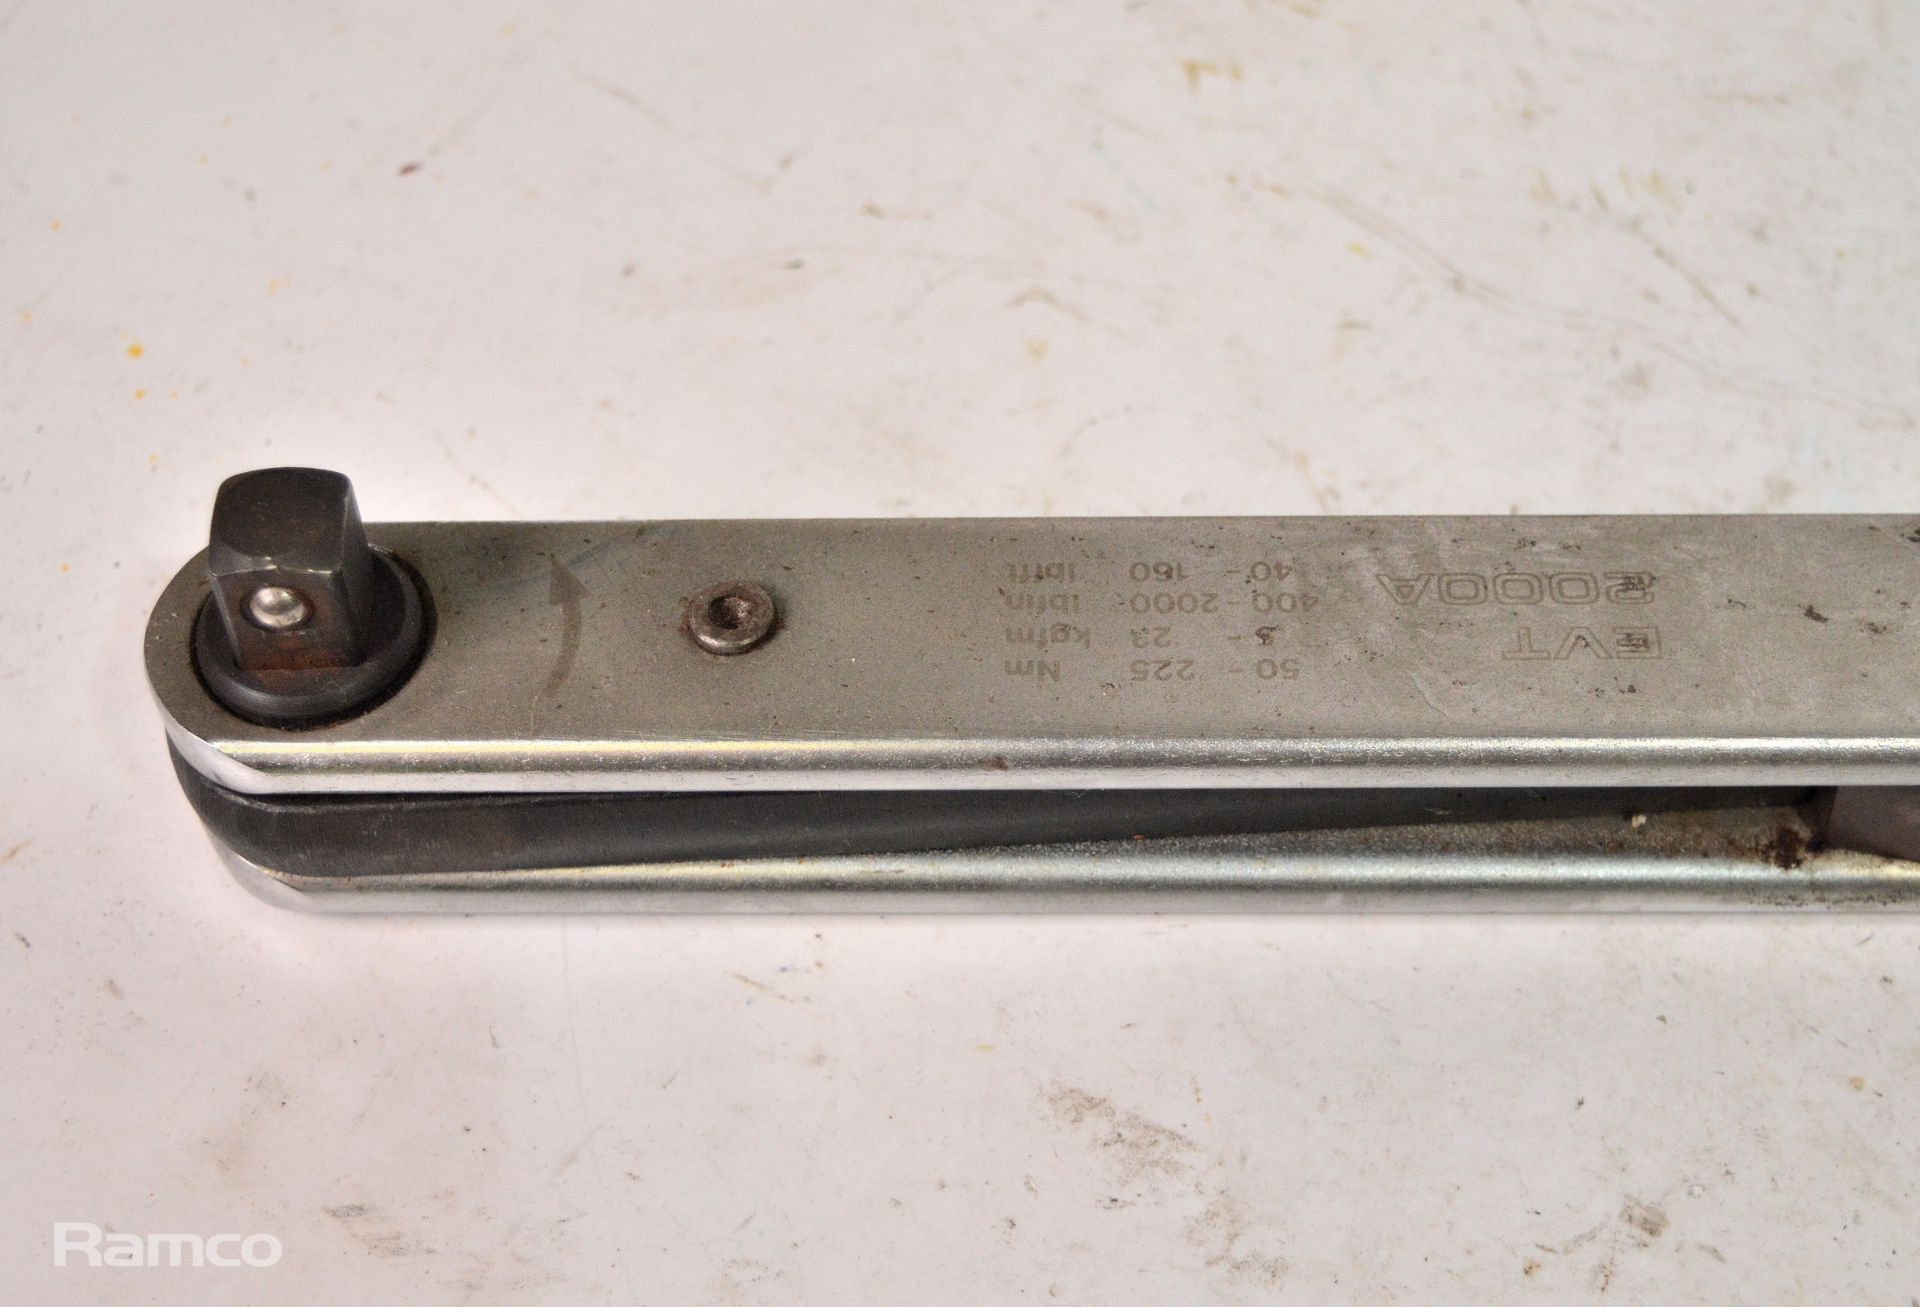 Britool EVT 20000A Torque Wrench 50-225 Nm - Image 2 of 3